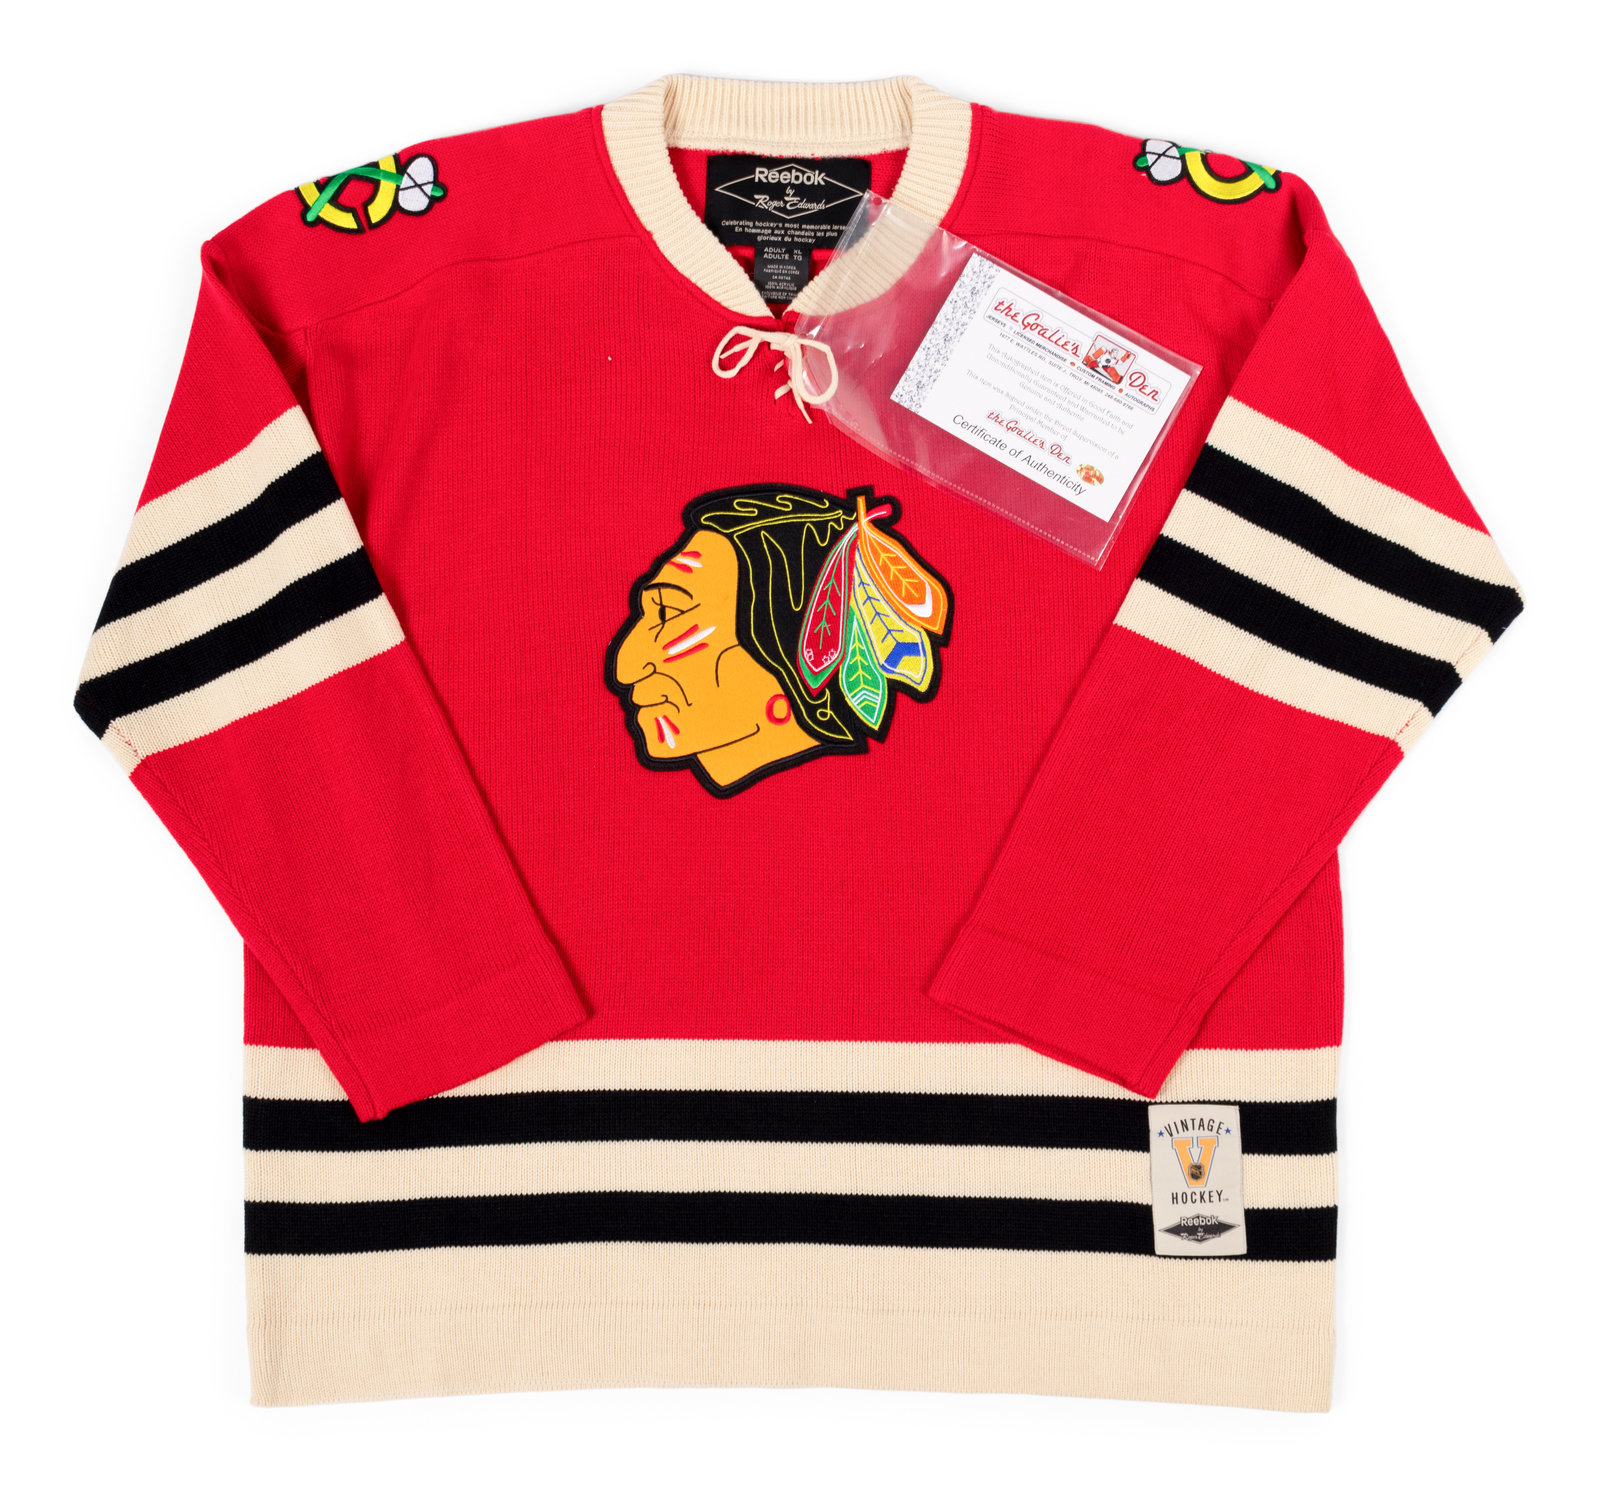 Bobby Hull T-Shirts for Sale - Fine Art America